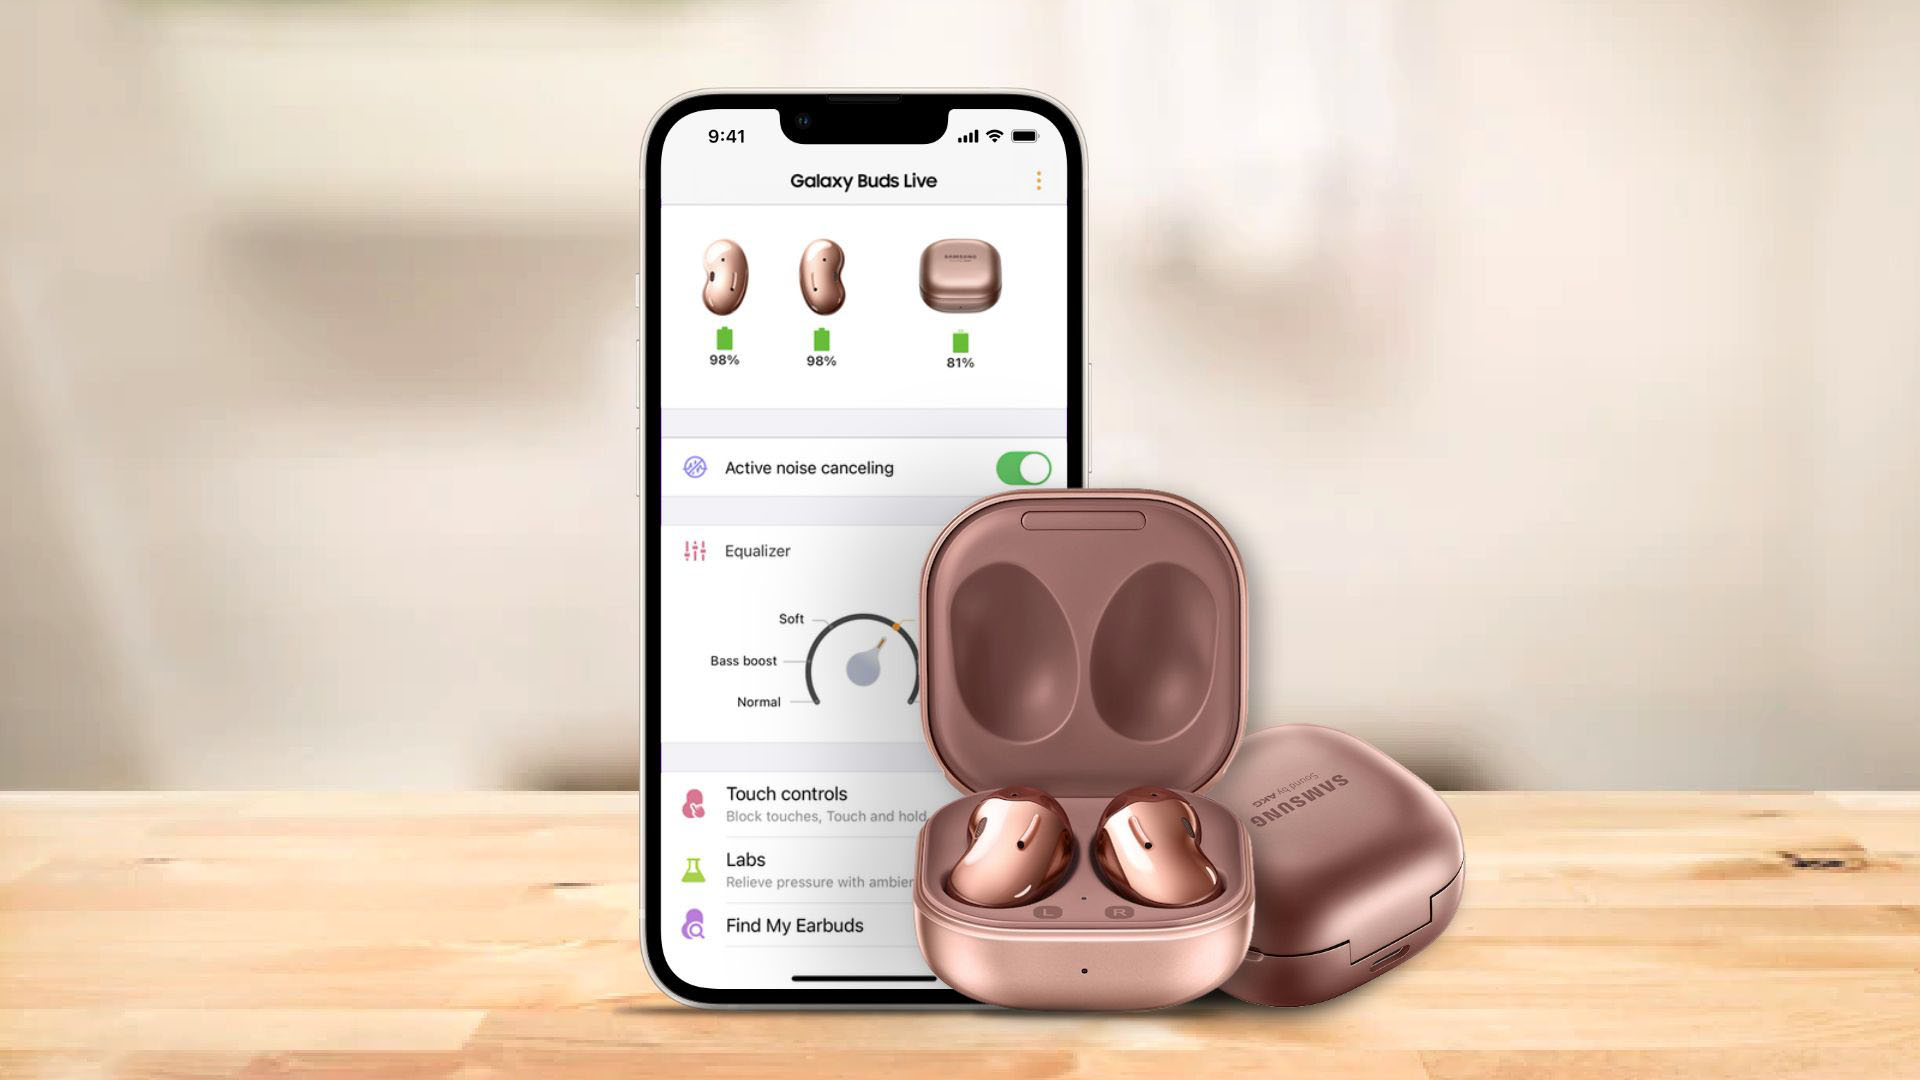 Galaxy buds app showing functions in-app interface